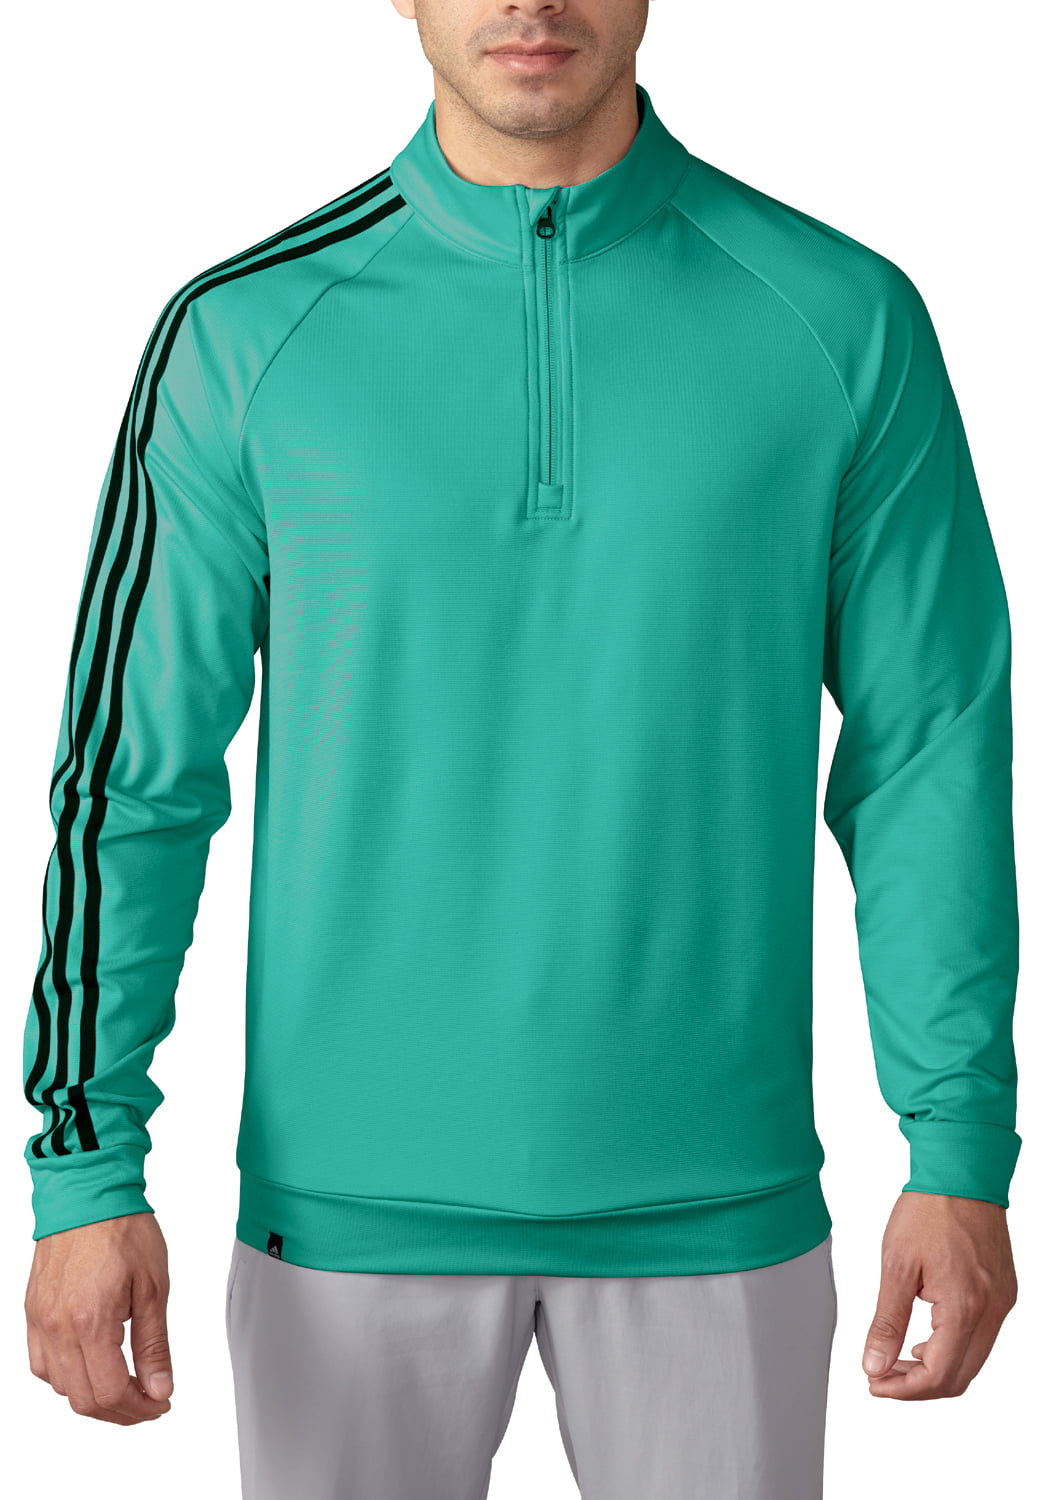 Adidas Golf 3 Stripes 1/4 Zip Pullover TM4252S6 2016 Mens CLOSEOUT New